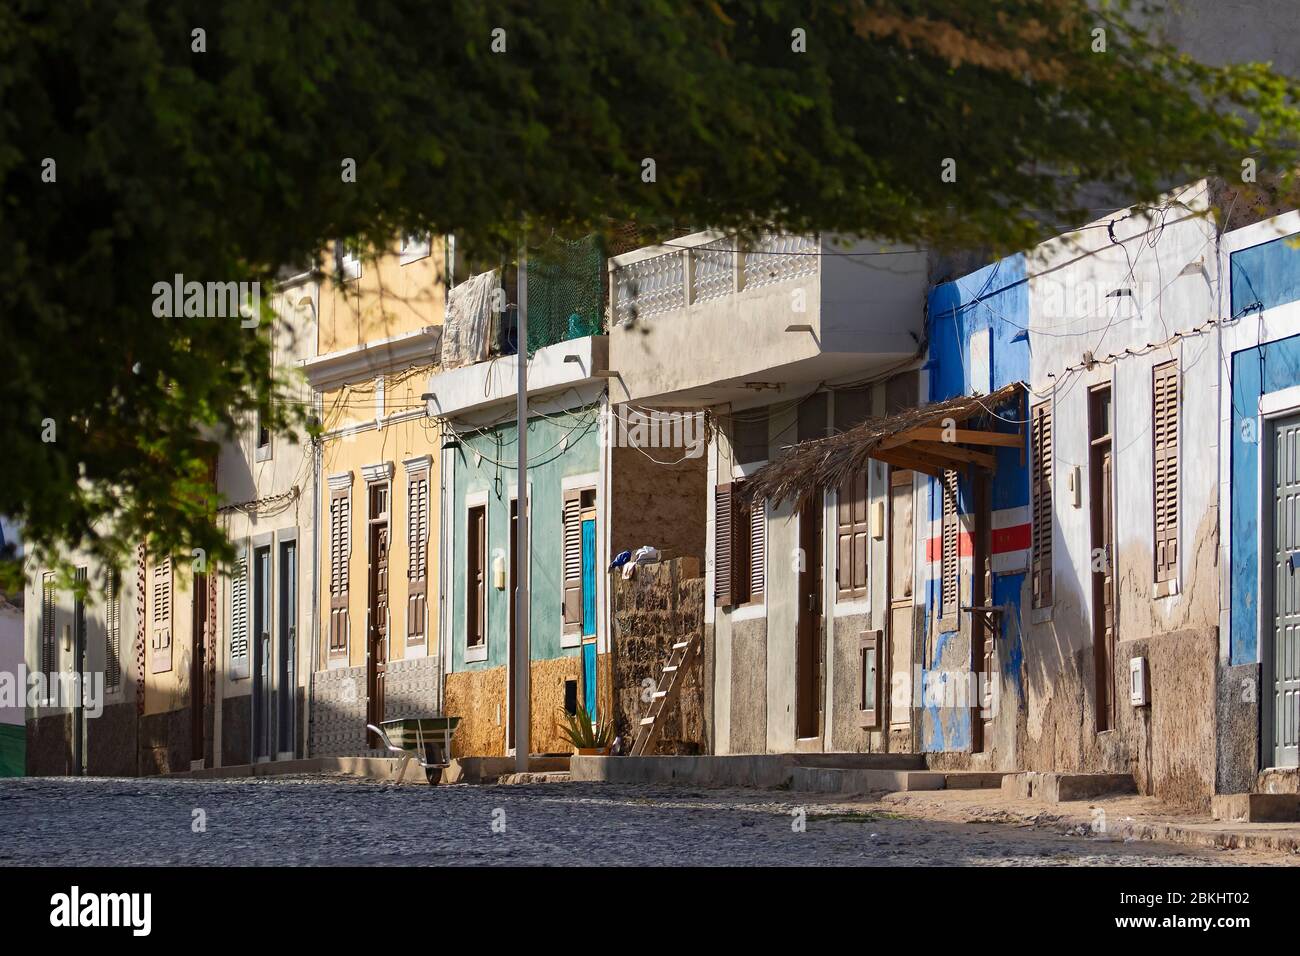 Empty street with colourful houses near the harbour / port in the city Sal Rei on the island Boa Vista, Cape Verde / Cabo Verde archipelago Stock Photo